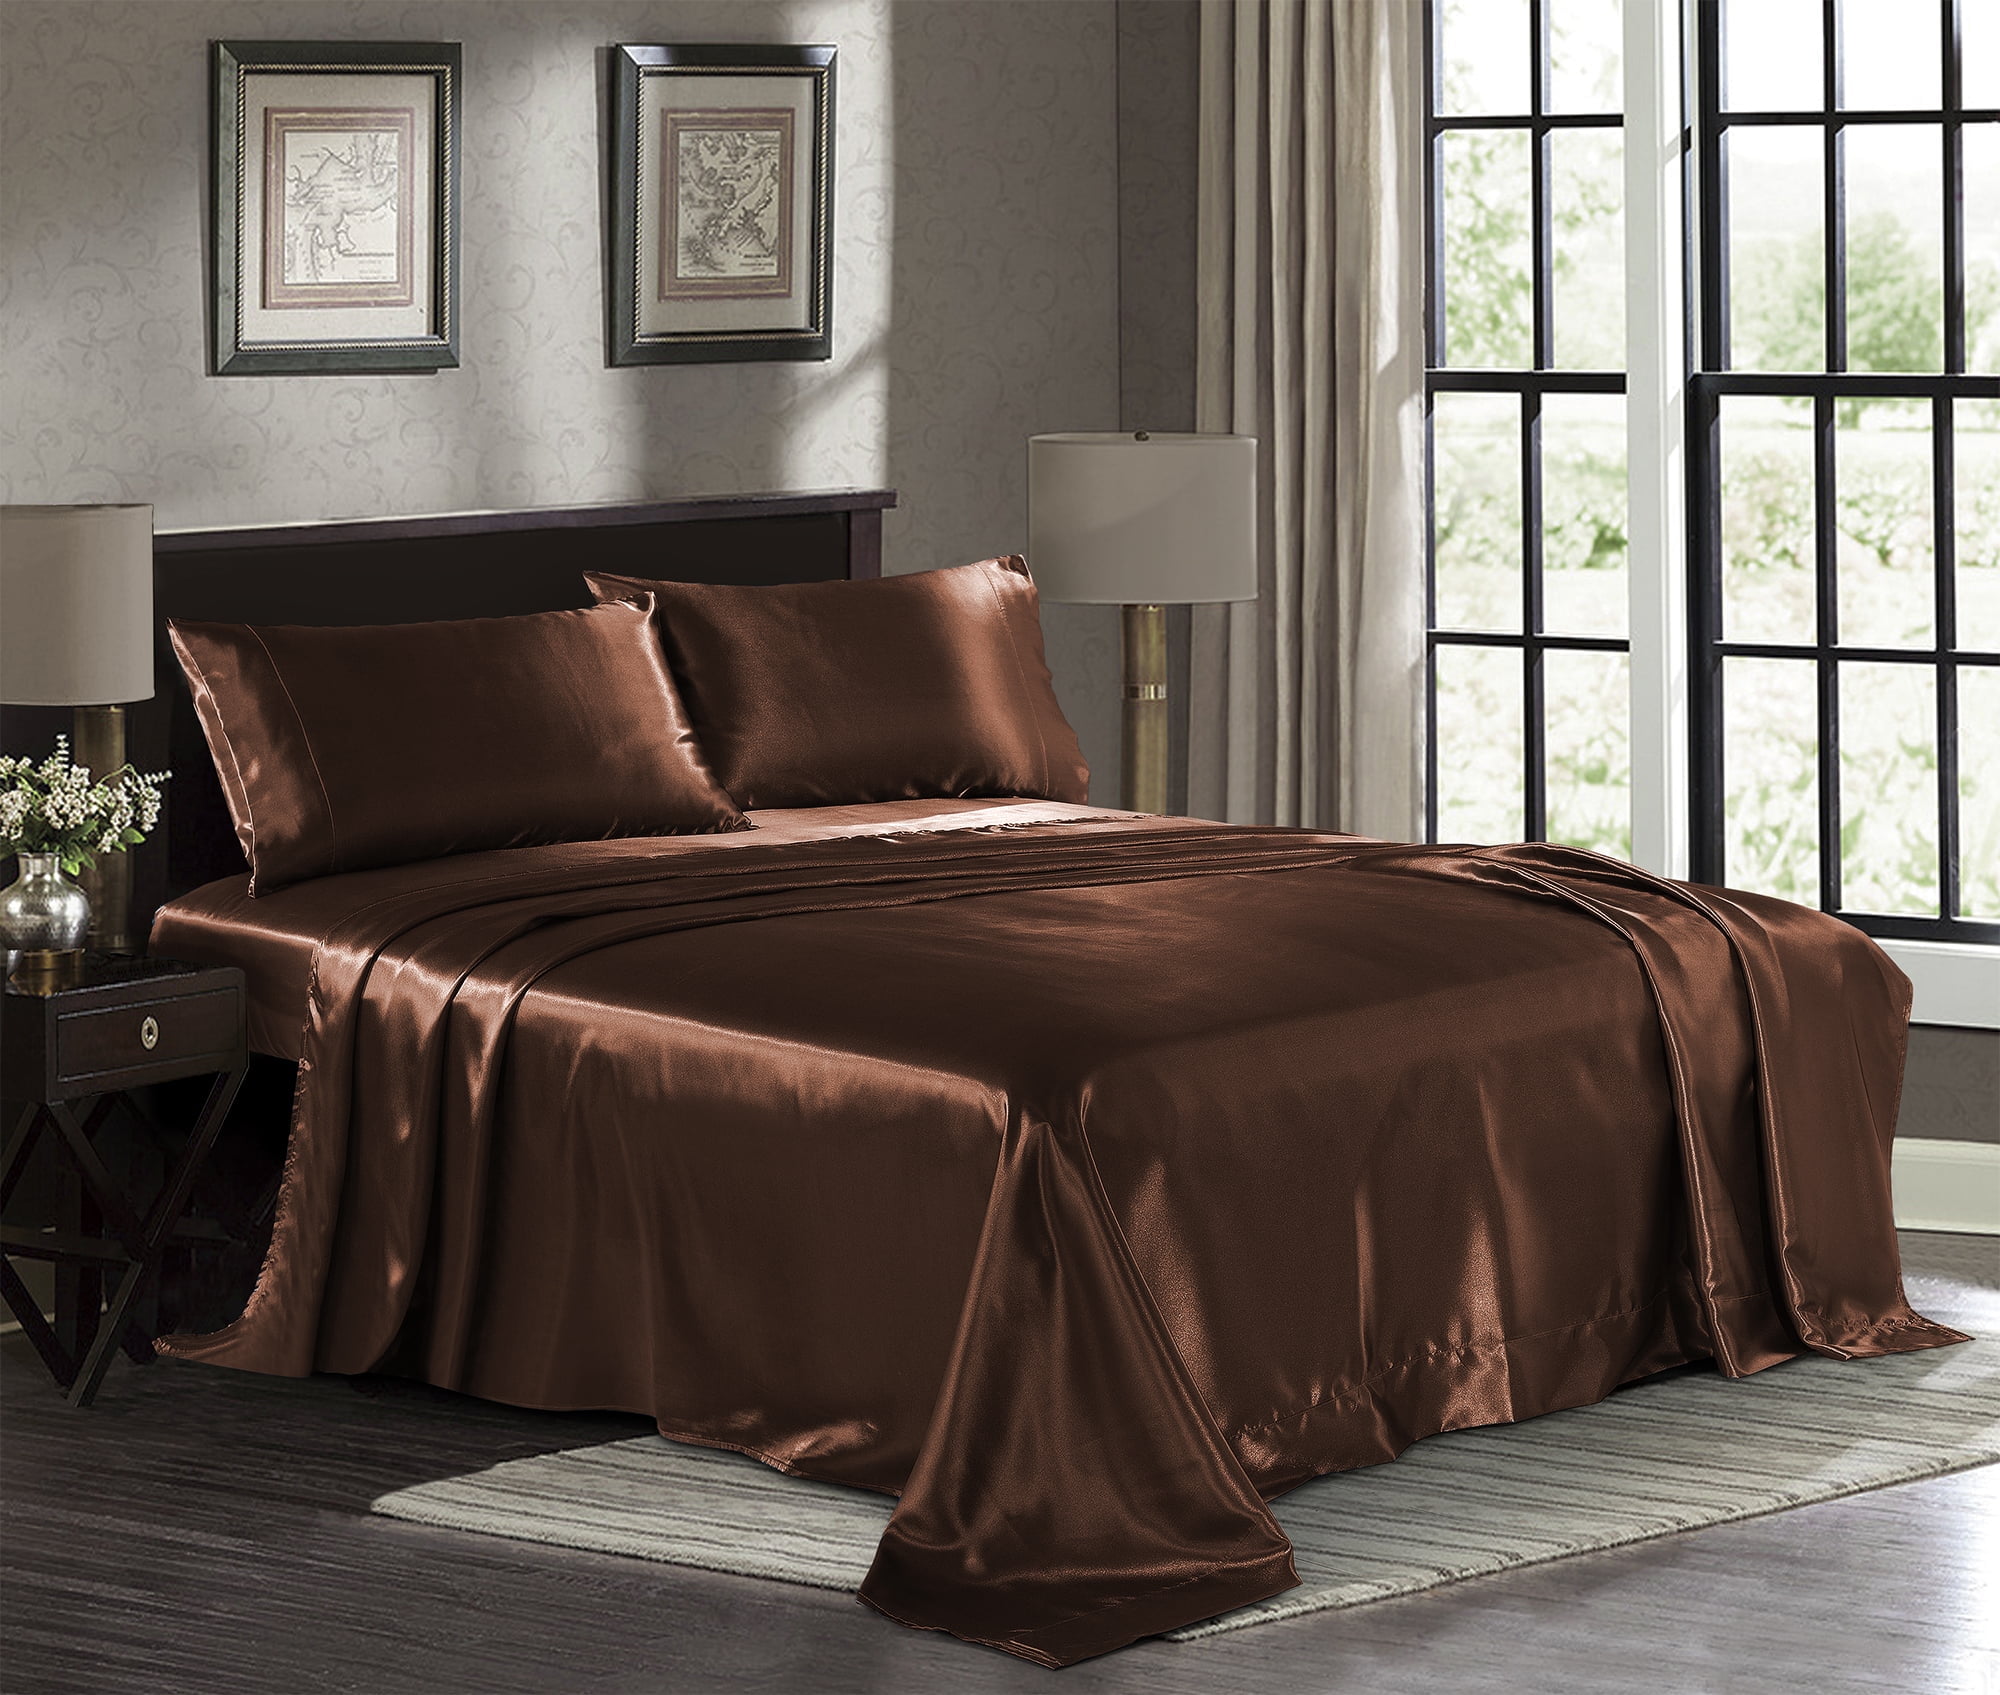 Iconic Collection Microfiber Sheet Set (Dark Colors)